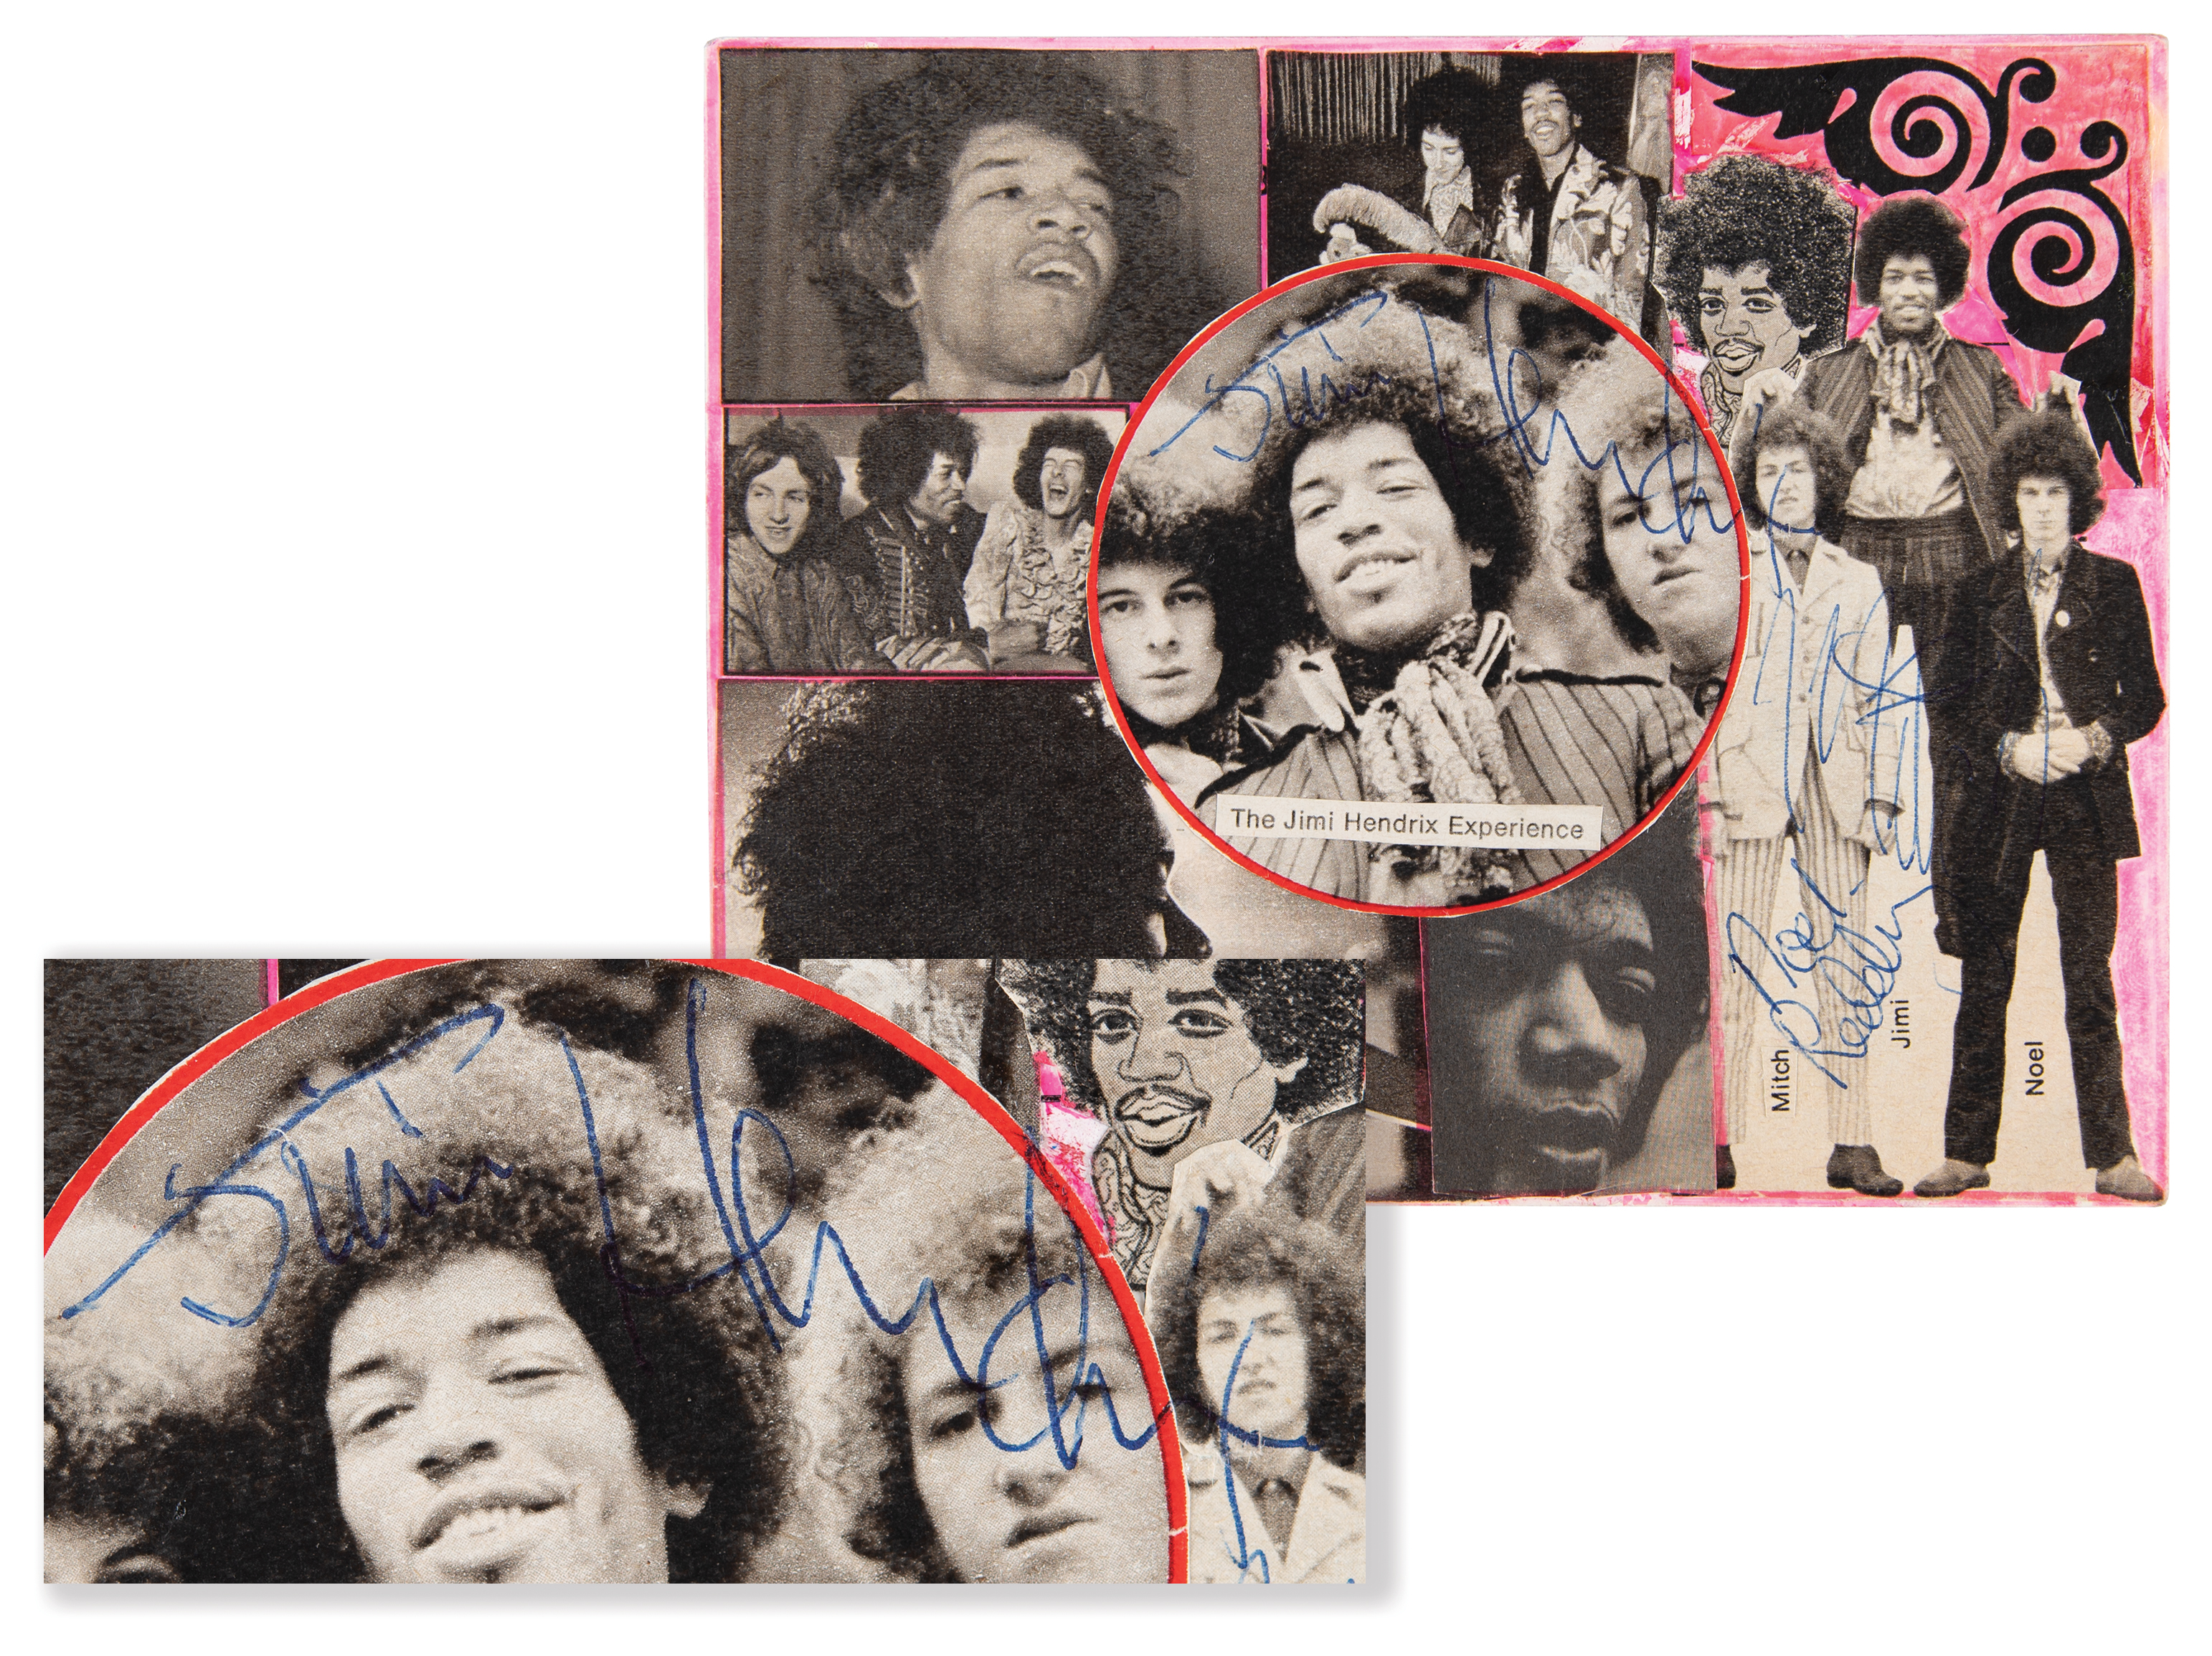 Lot #9061 Jimi Hendrix Experience Signed Photograph - Obtained In-Person at the Halle Münsterland in 1969